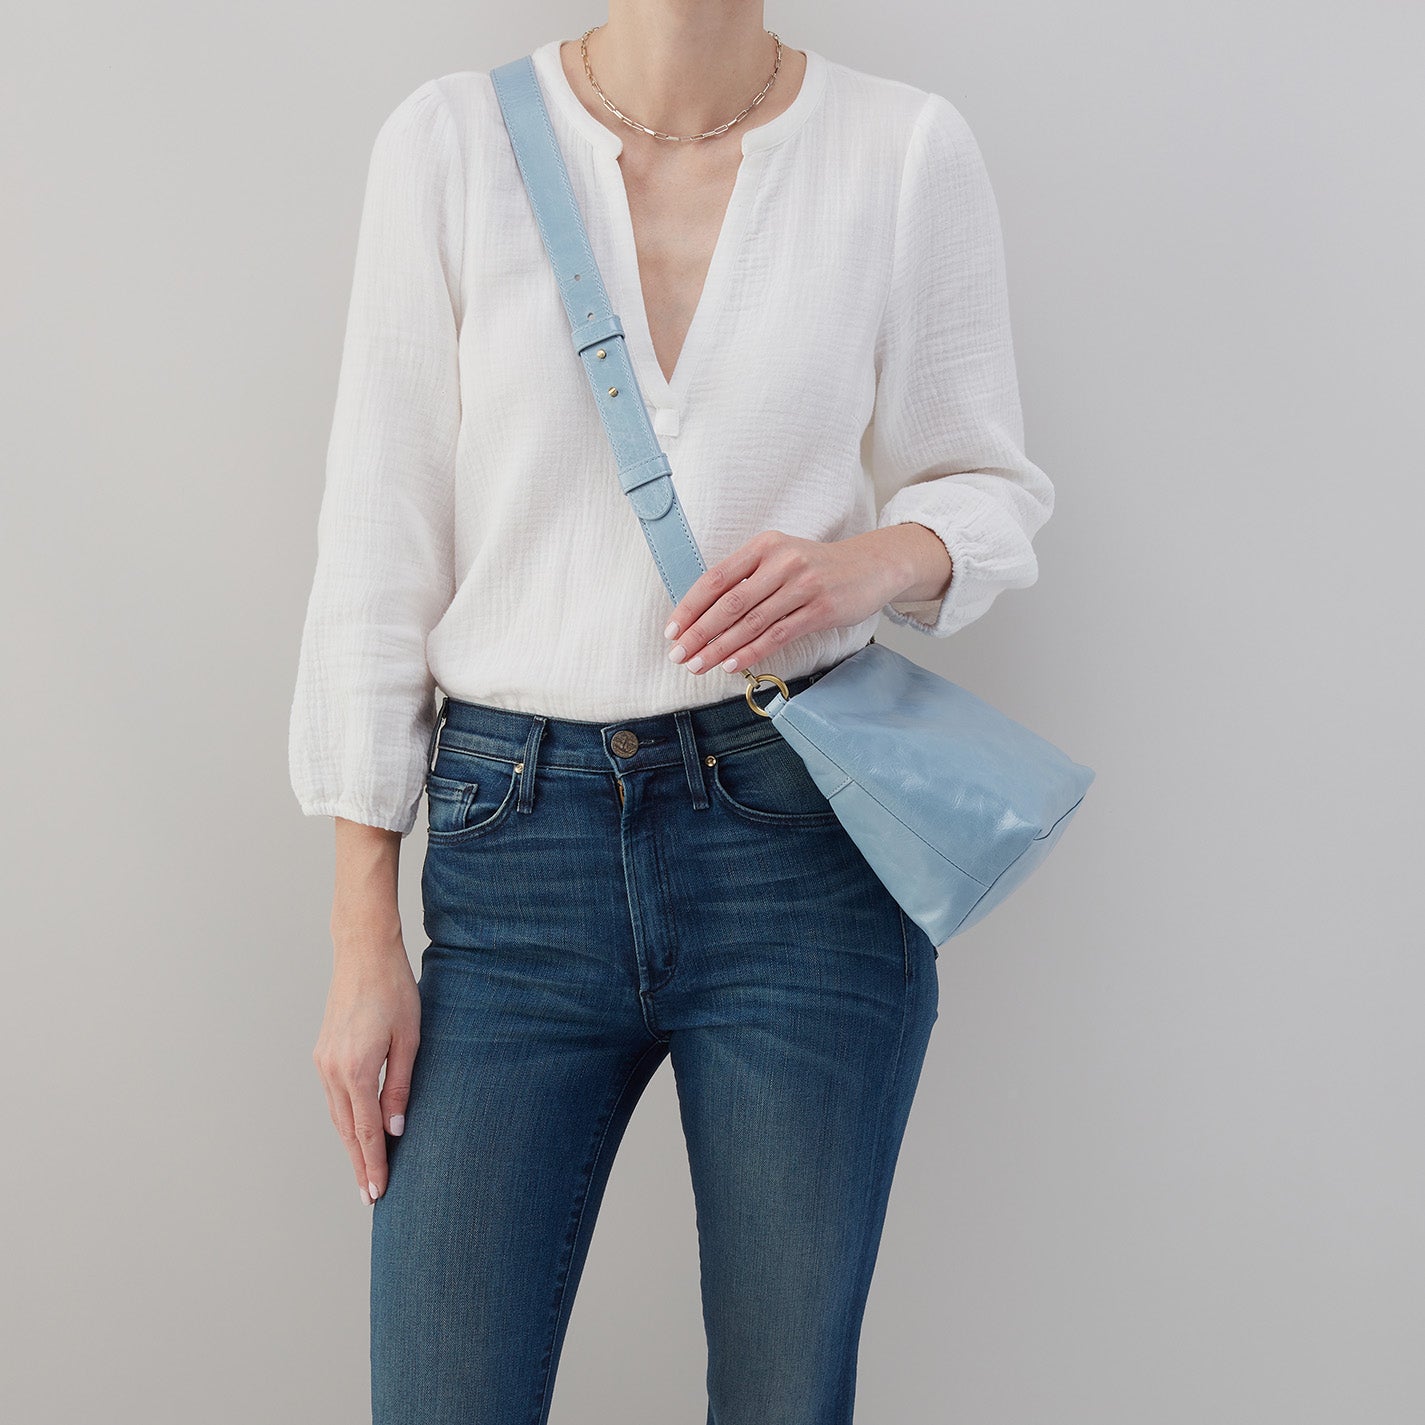 person wearing jeans and a white top with cornflower Ashe Crossbody on their shoulder.